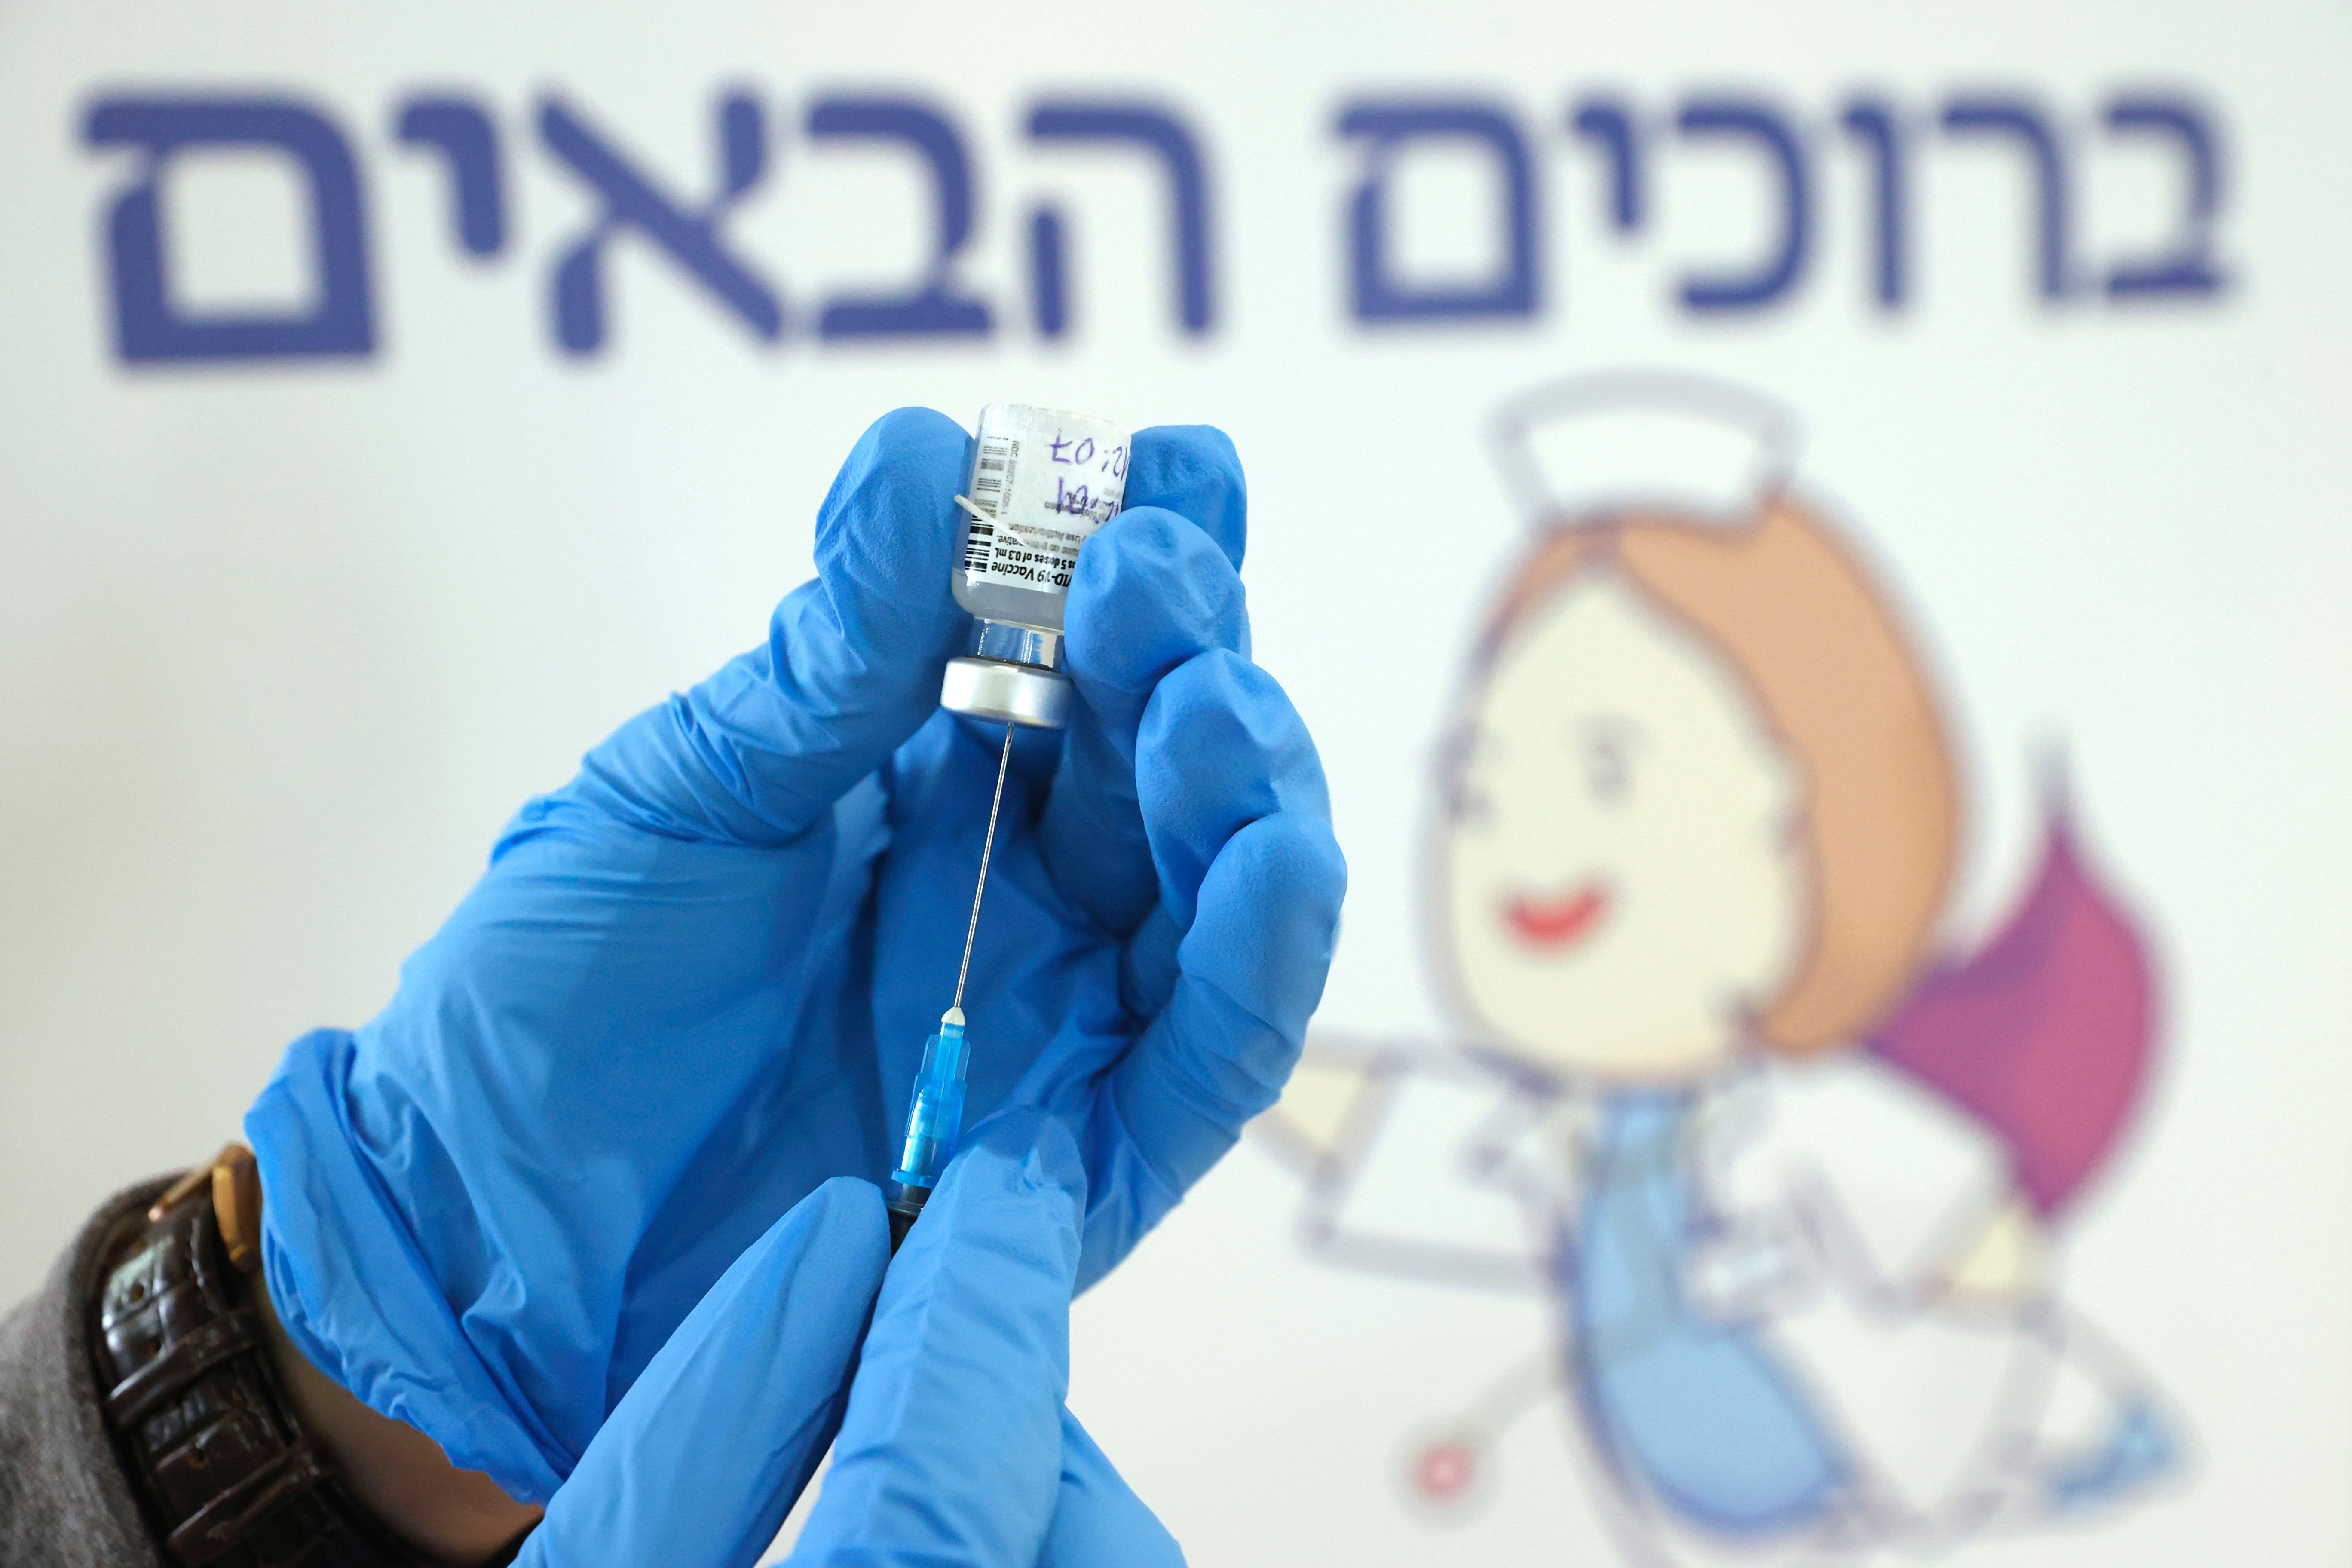 Covid variant from South Africa was able to ‘break through’ Pfizer vaccine in Israeli study